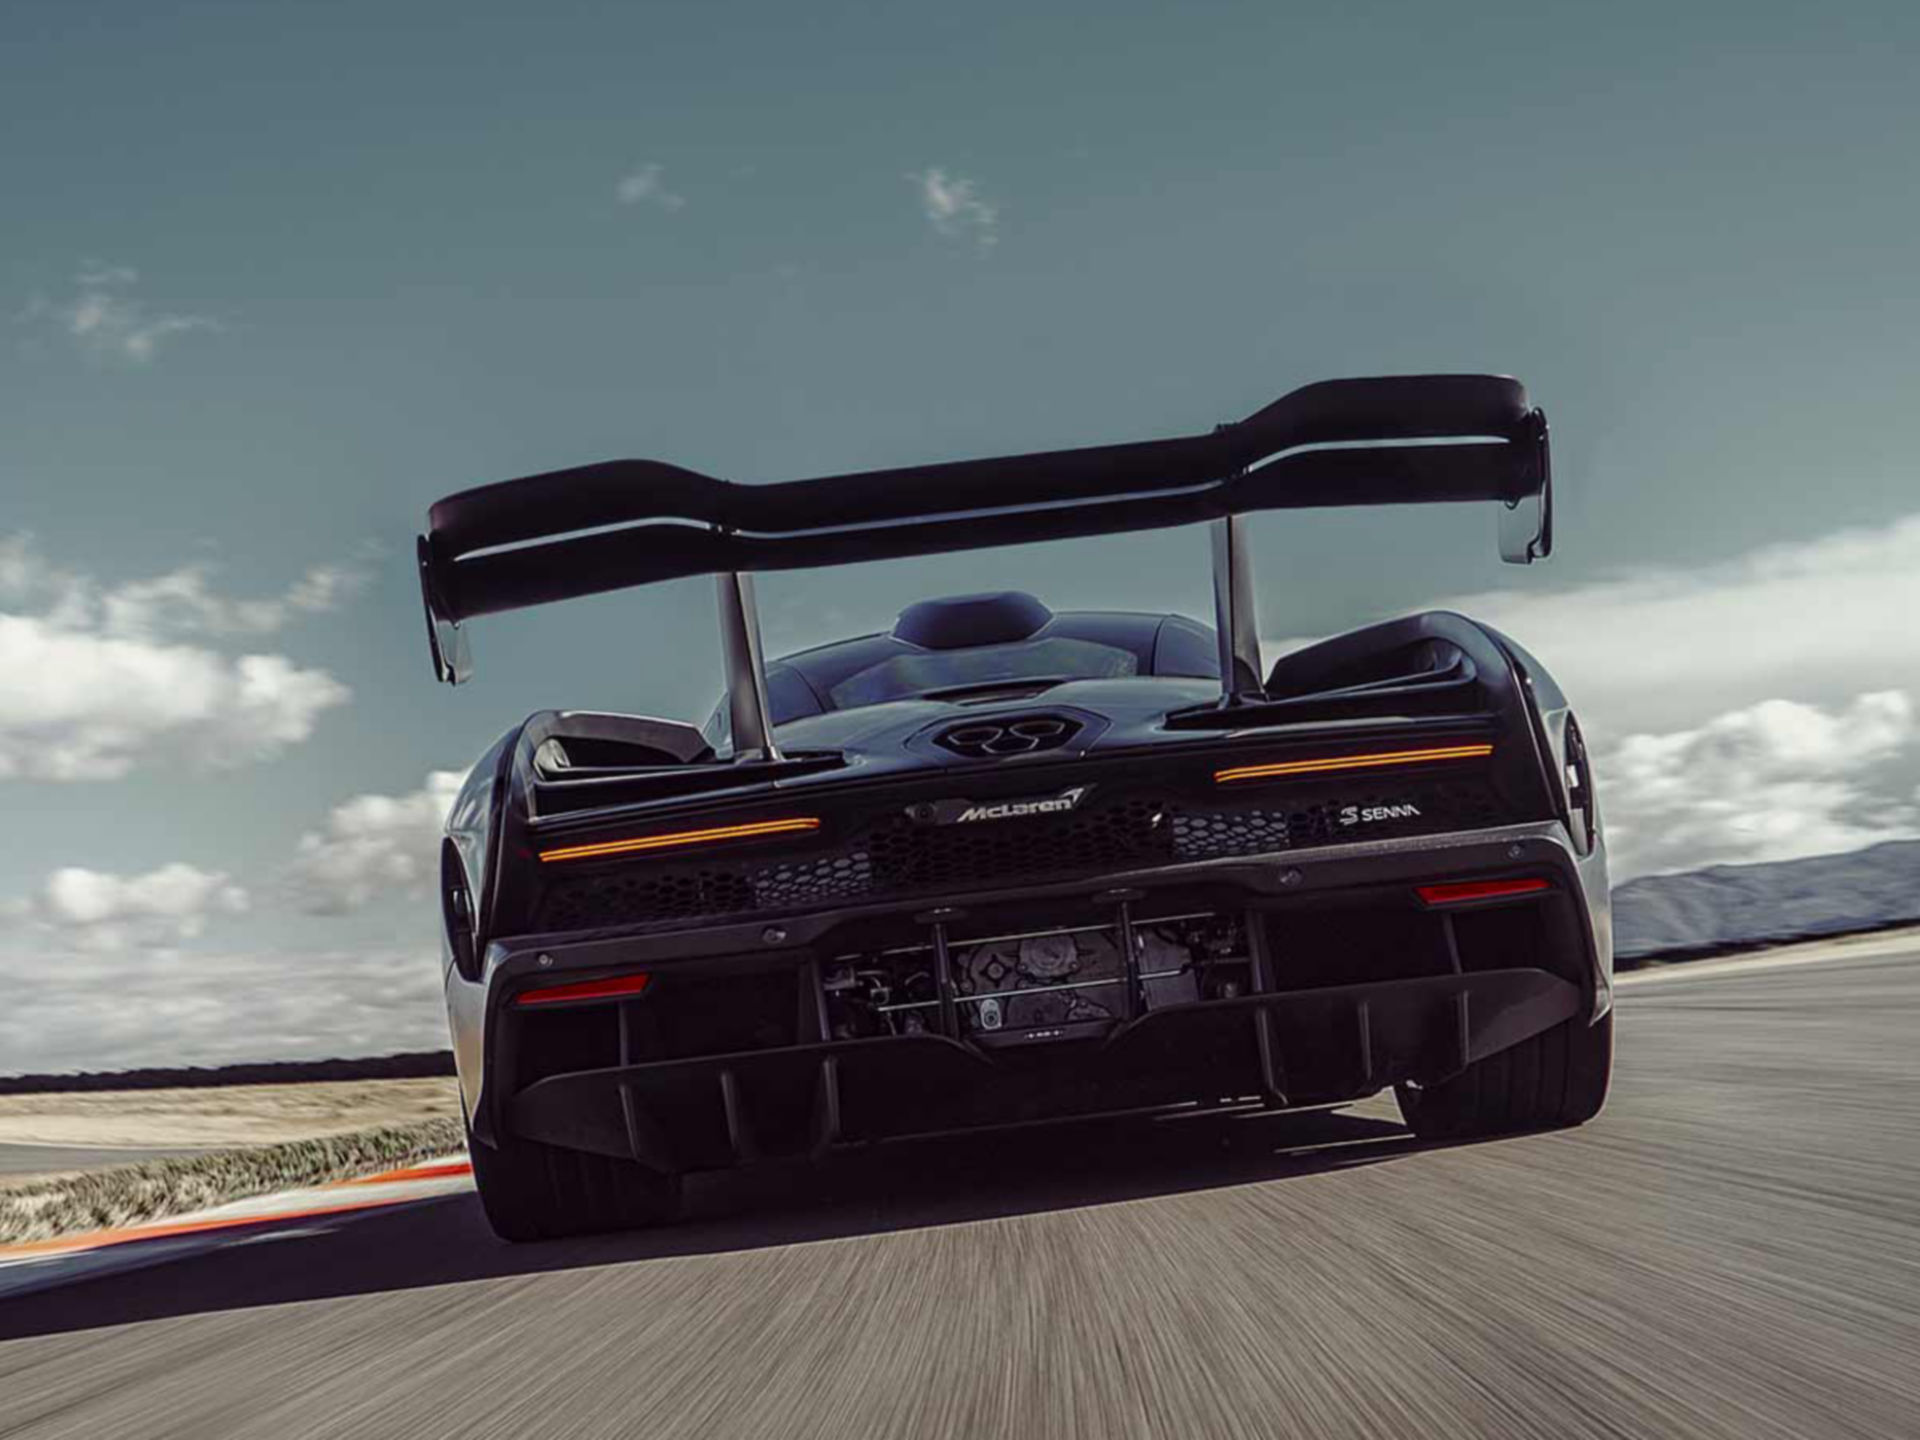 Rear view of black McLaren Senna being driven down track at high speed